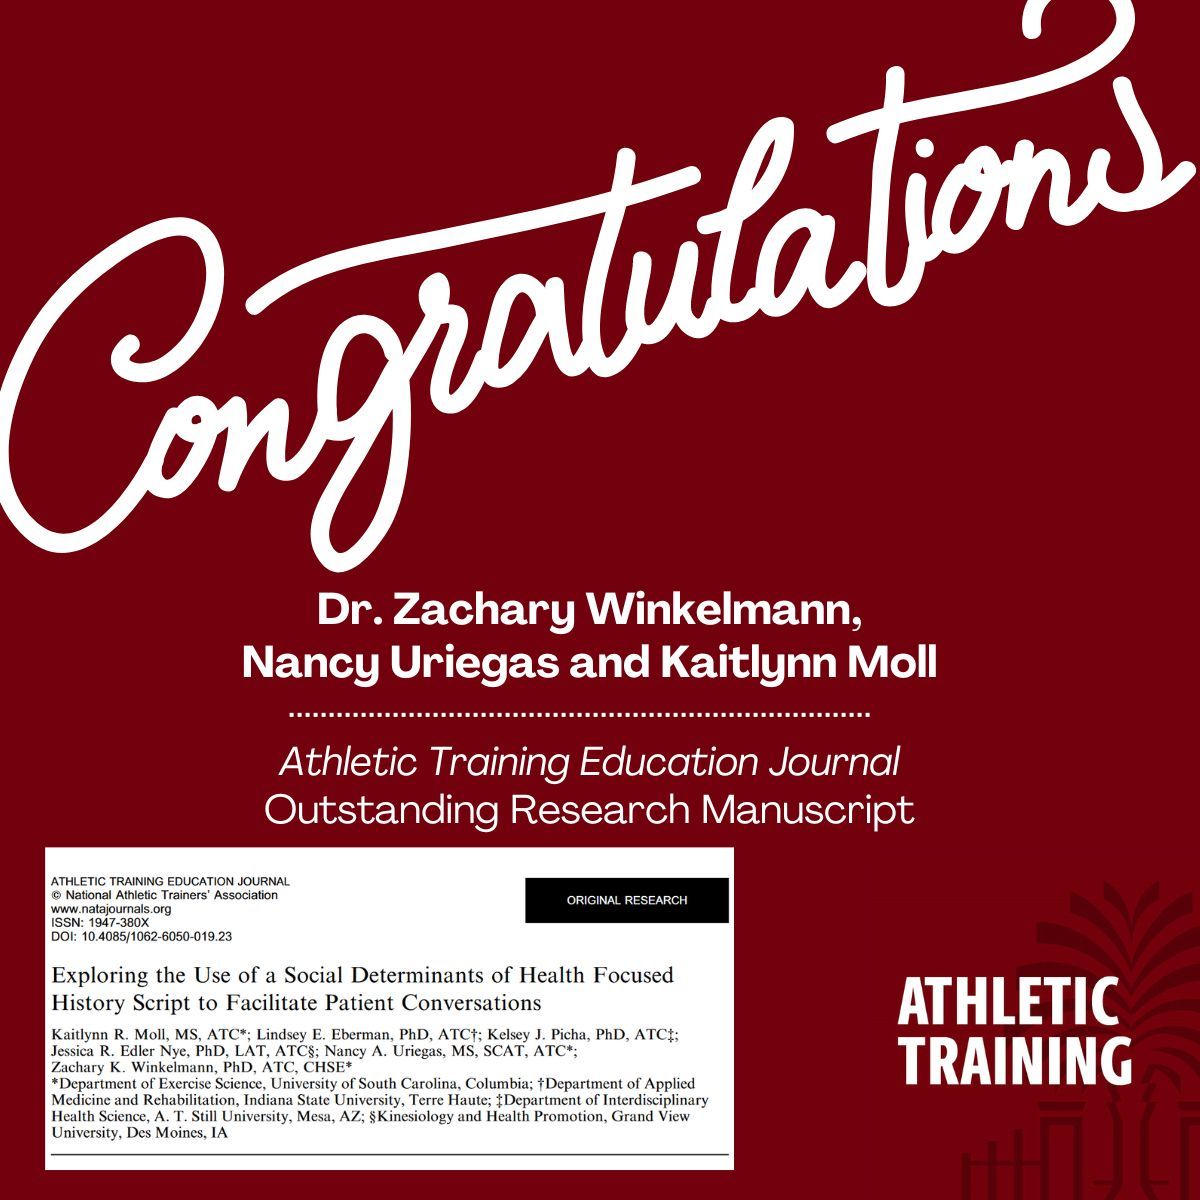 Congratulations to Dr. Zachary Winkelmann (senior author), Kaitlynn Moll (’23 PPAT alum, student primary author), and Nancy Uriegas (soon-to-be ’24 PhD alum, co-author) on being awarded the 2023 Outstanding Manuscript Award for the Athletic Training Education Journal! #GamecockAT